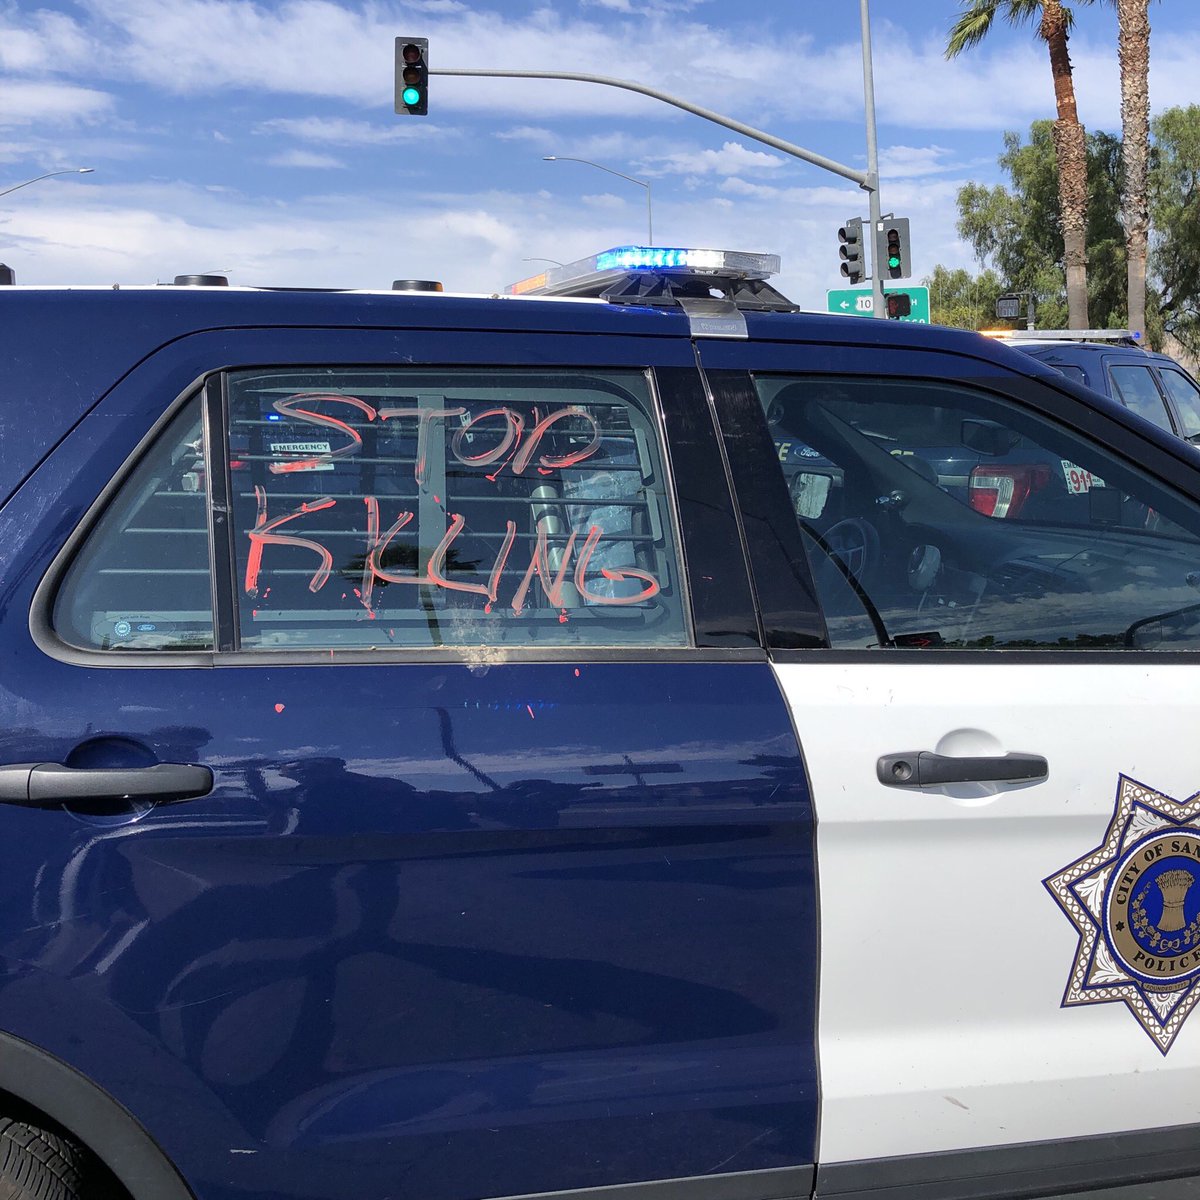 There is some heated confrontation but we try to calm ppl down. The damage tho?Broke squad car windows, one flat tire, and written messages this: STOP KILLING [8]